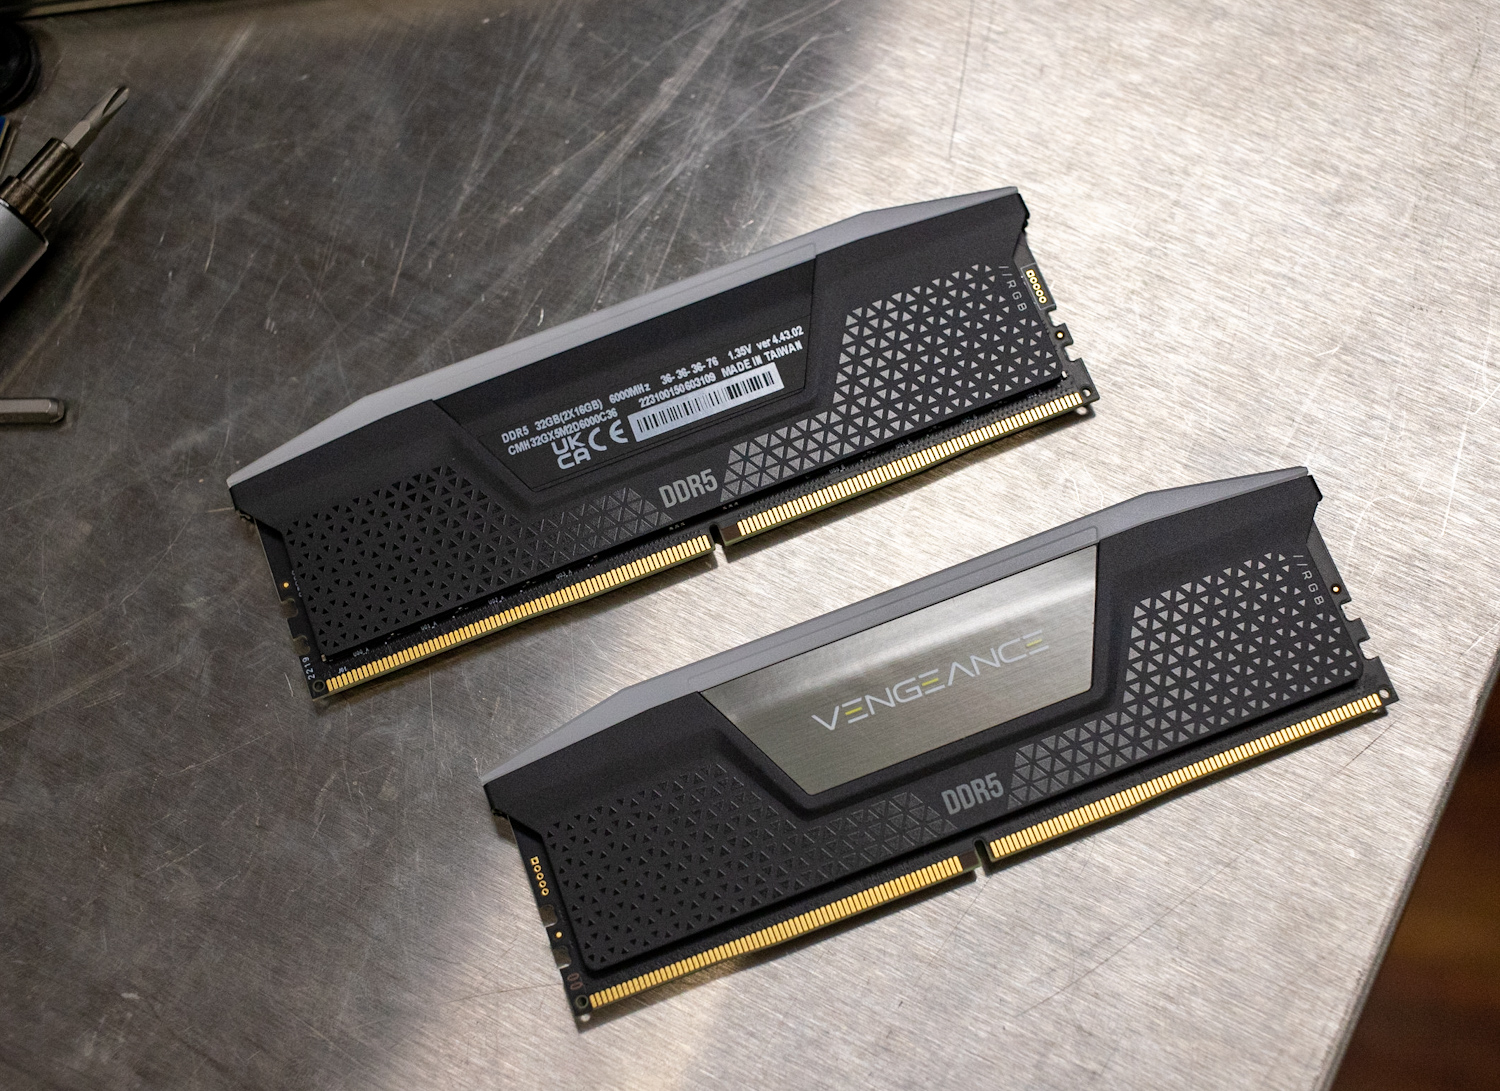 https://www.storagereview.com/wp-content/uploads/2022/08/StorageReview-Corsair-Vengeance-DDR5-6000-3.jpg